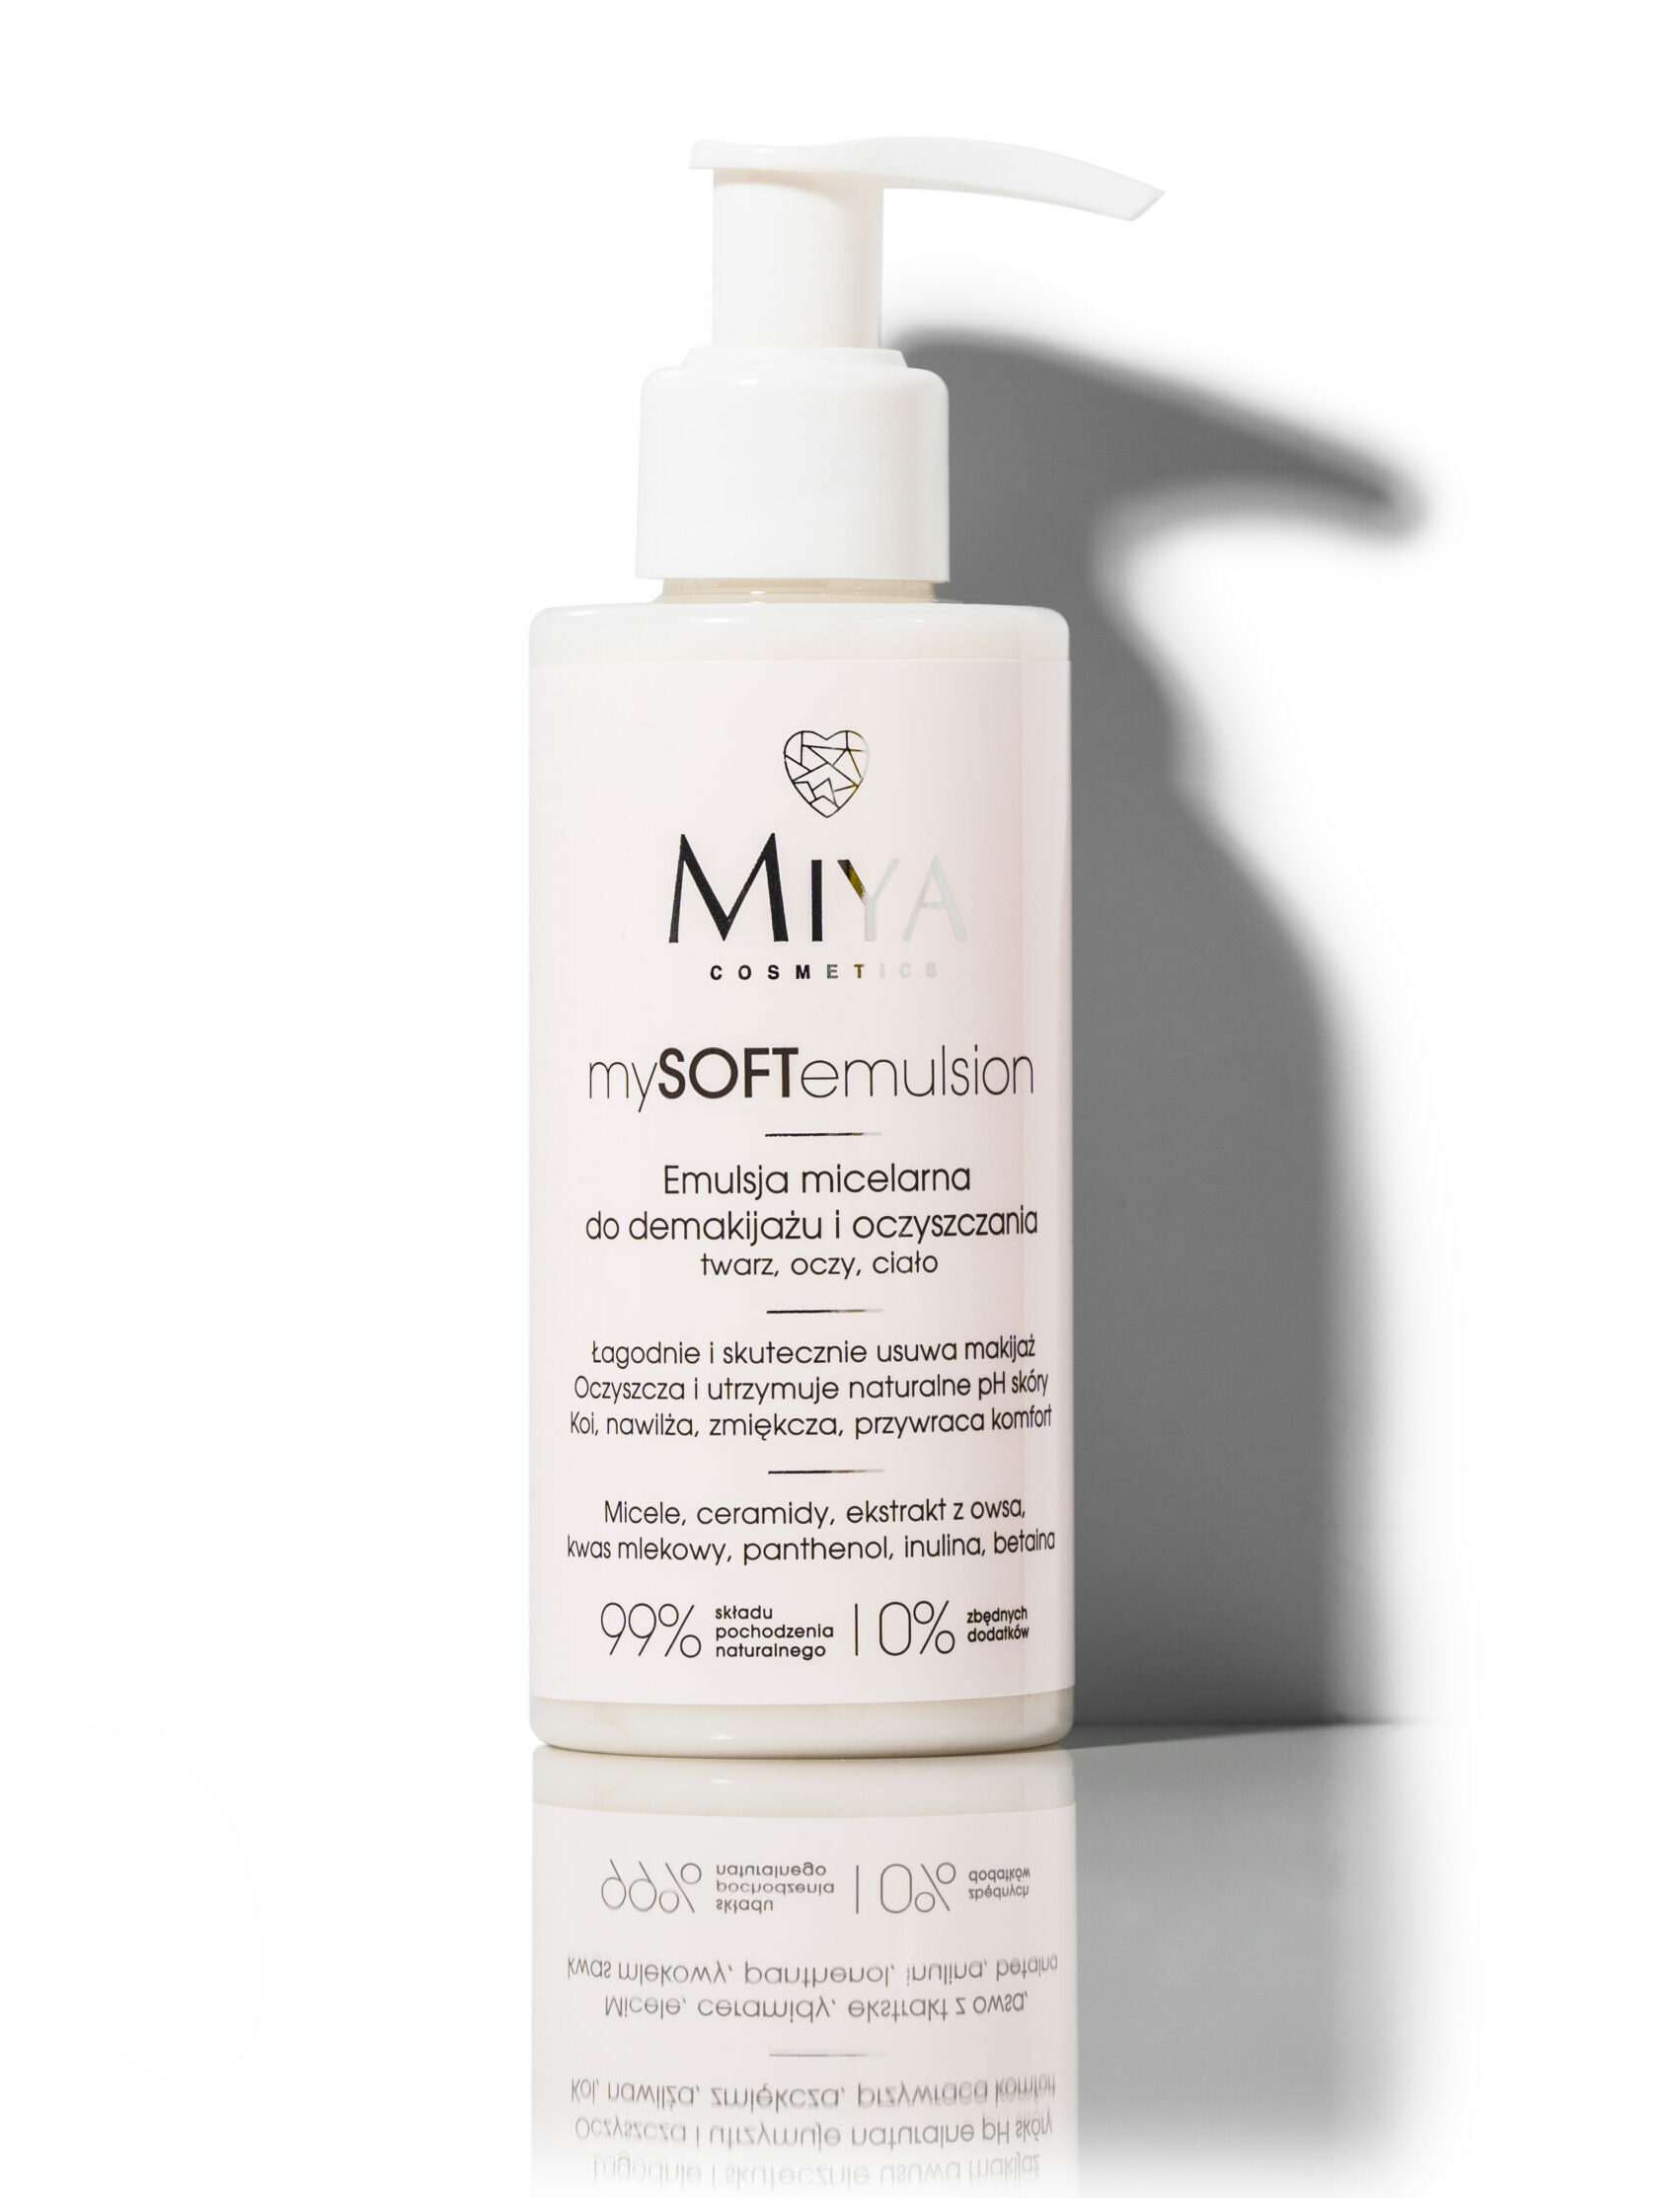 Micellar emulsion for make-up removal and cleansing